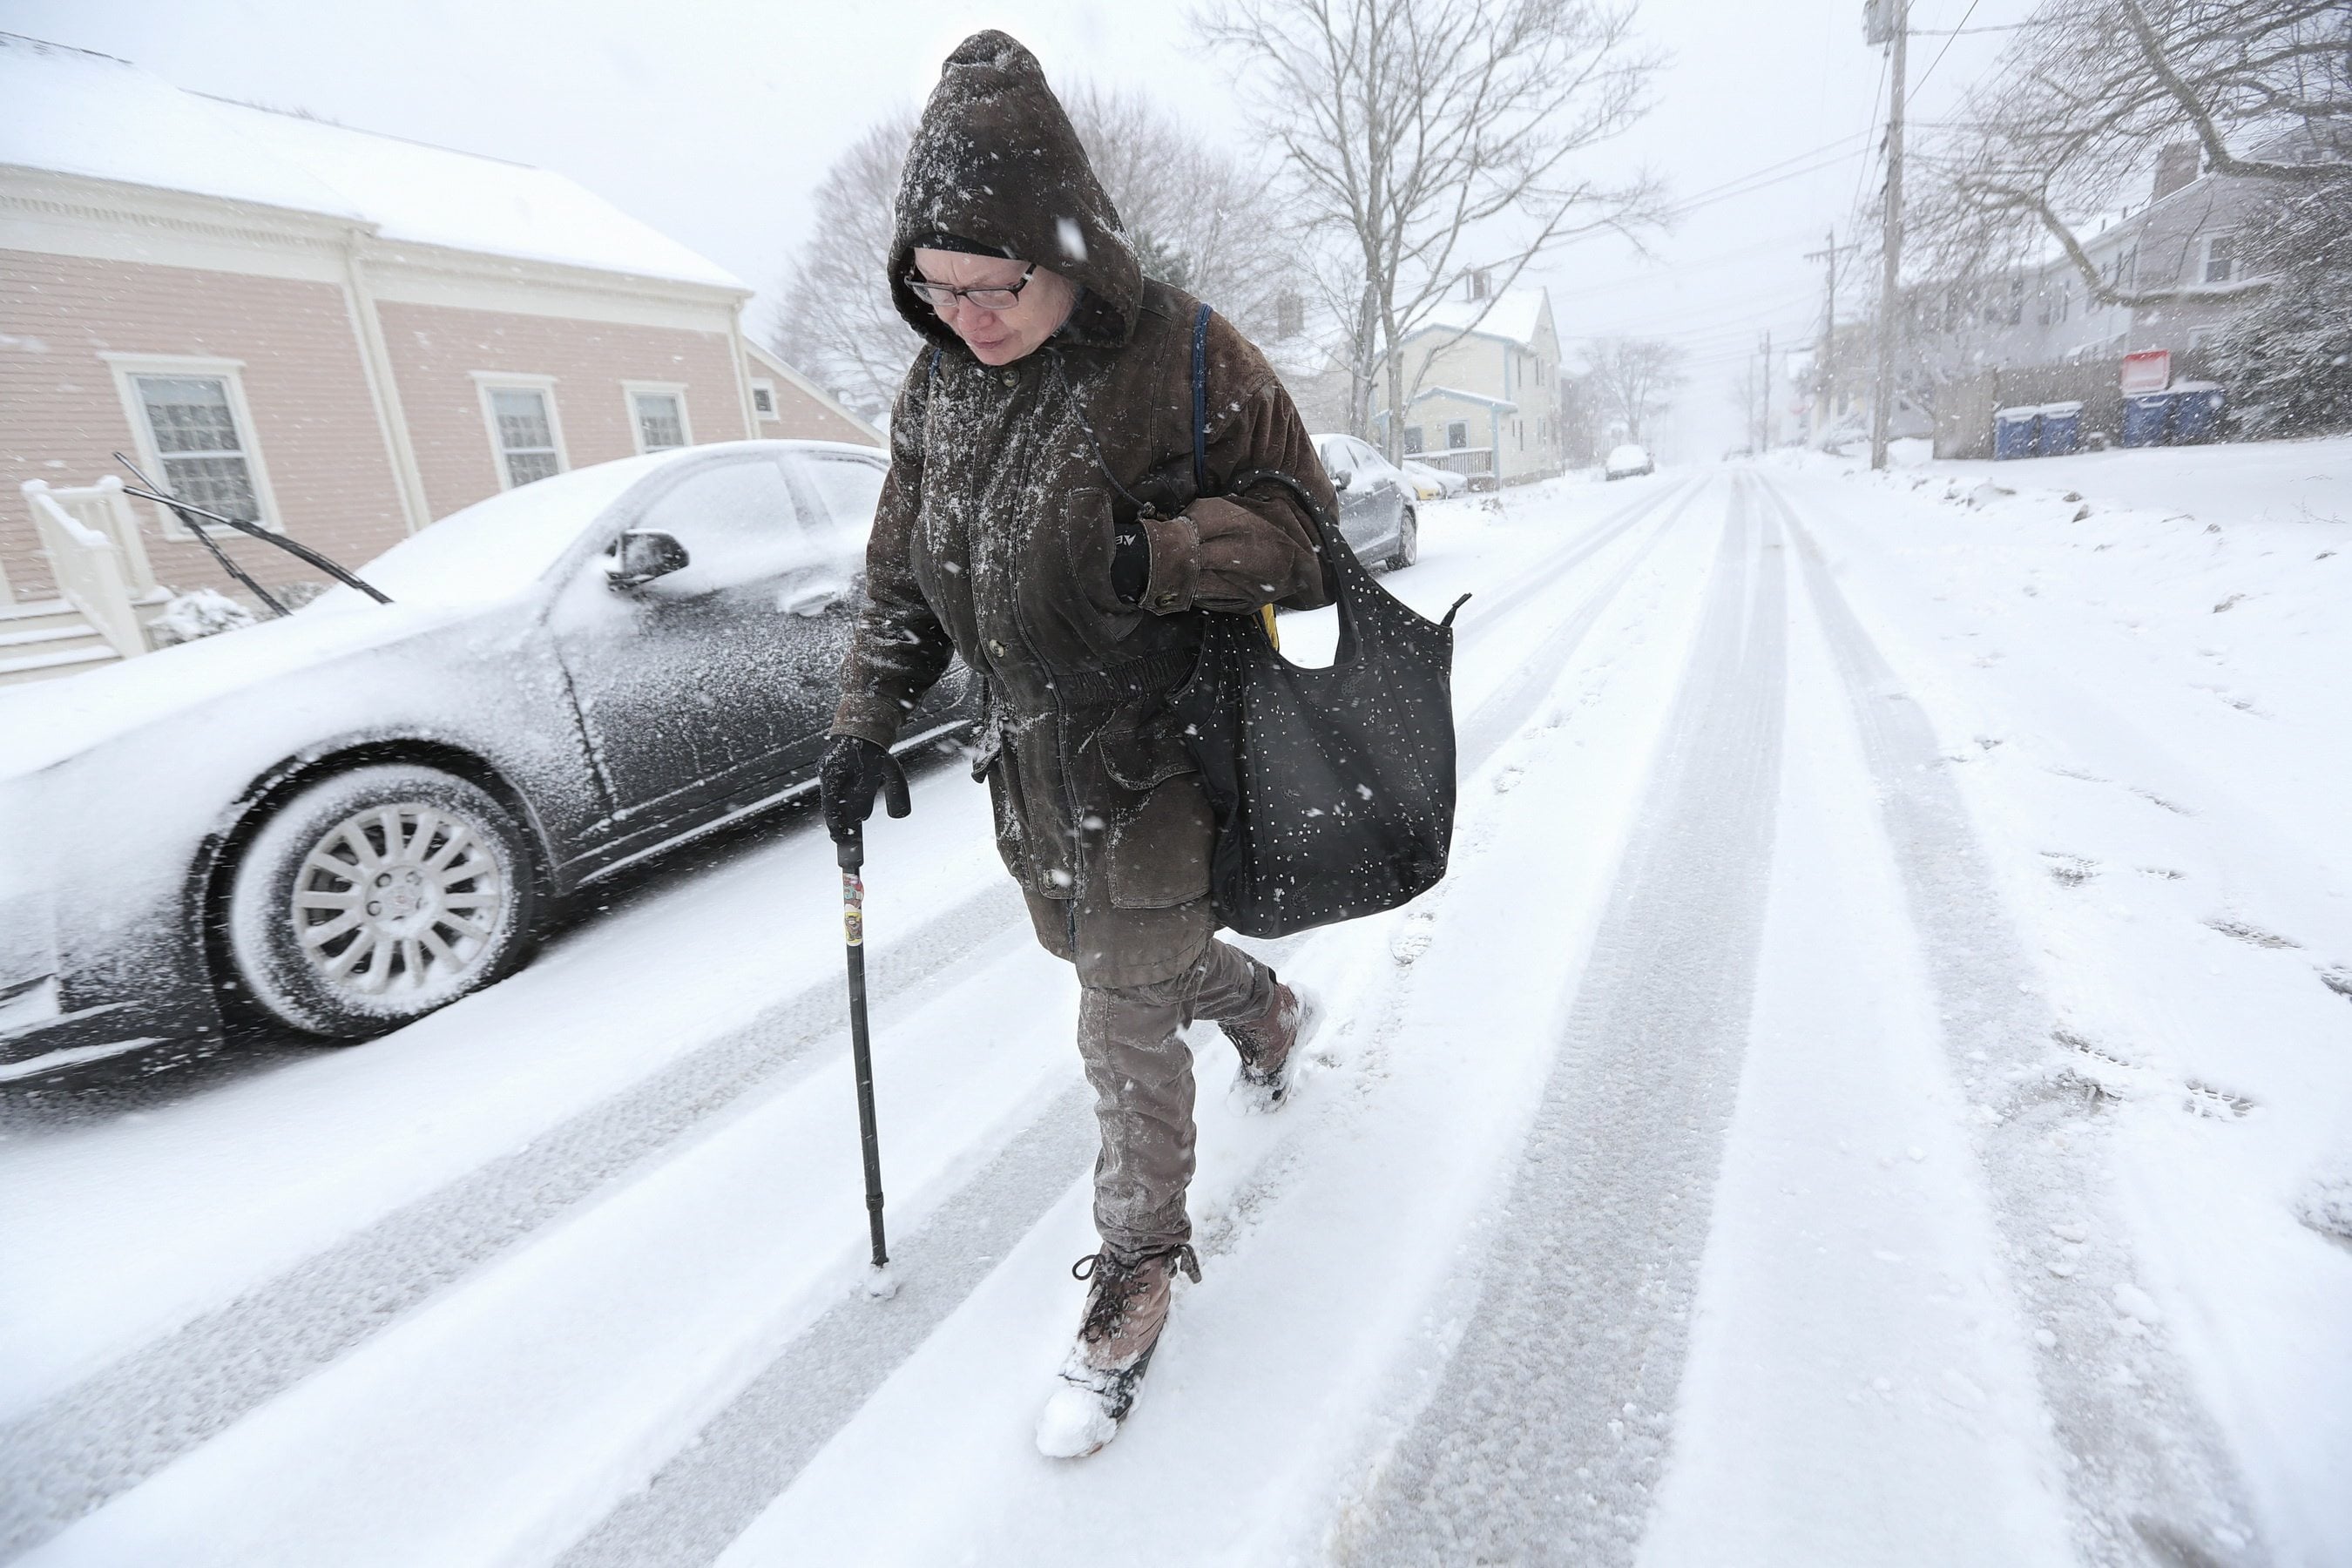 Anne Correia  walks in a snowstorm to visit her mother  at a nursing home on Monday in Fairhaven, Mass.   Coastal communities in Massachusetts are bracing for possible coastal flooding as a potent winter storm moves into the region.